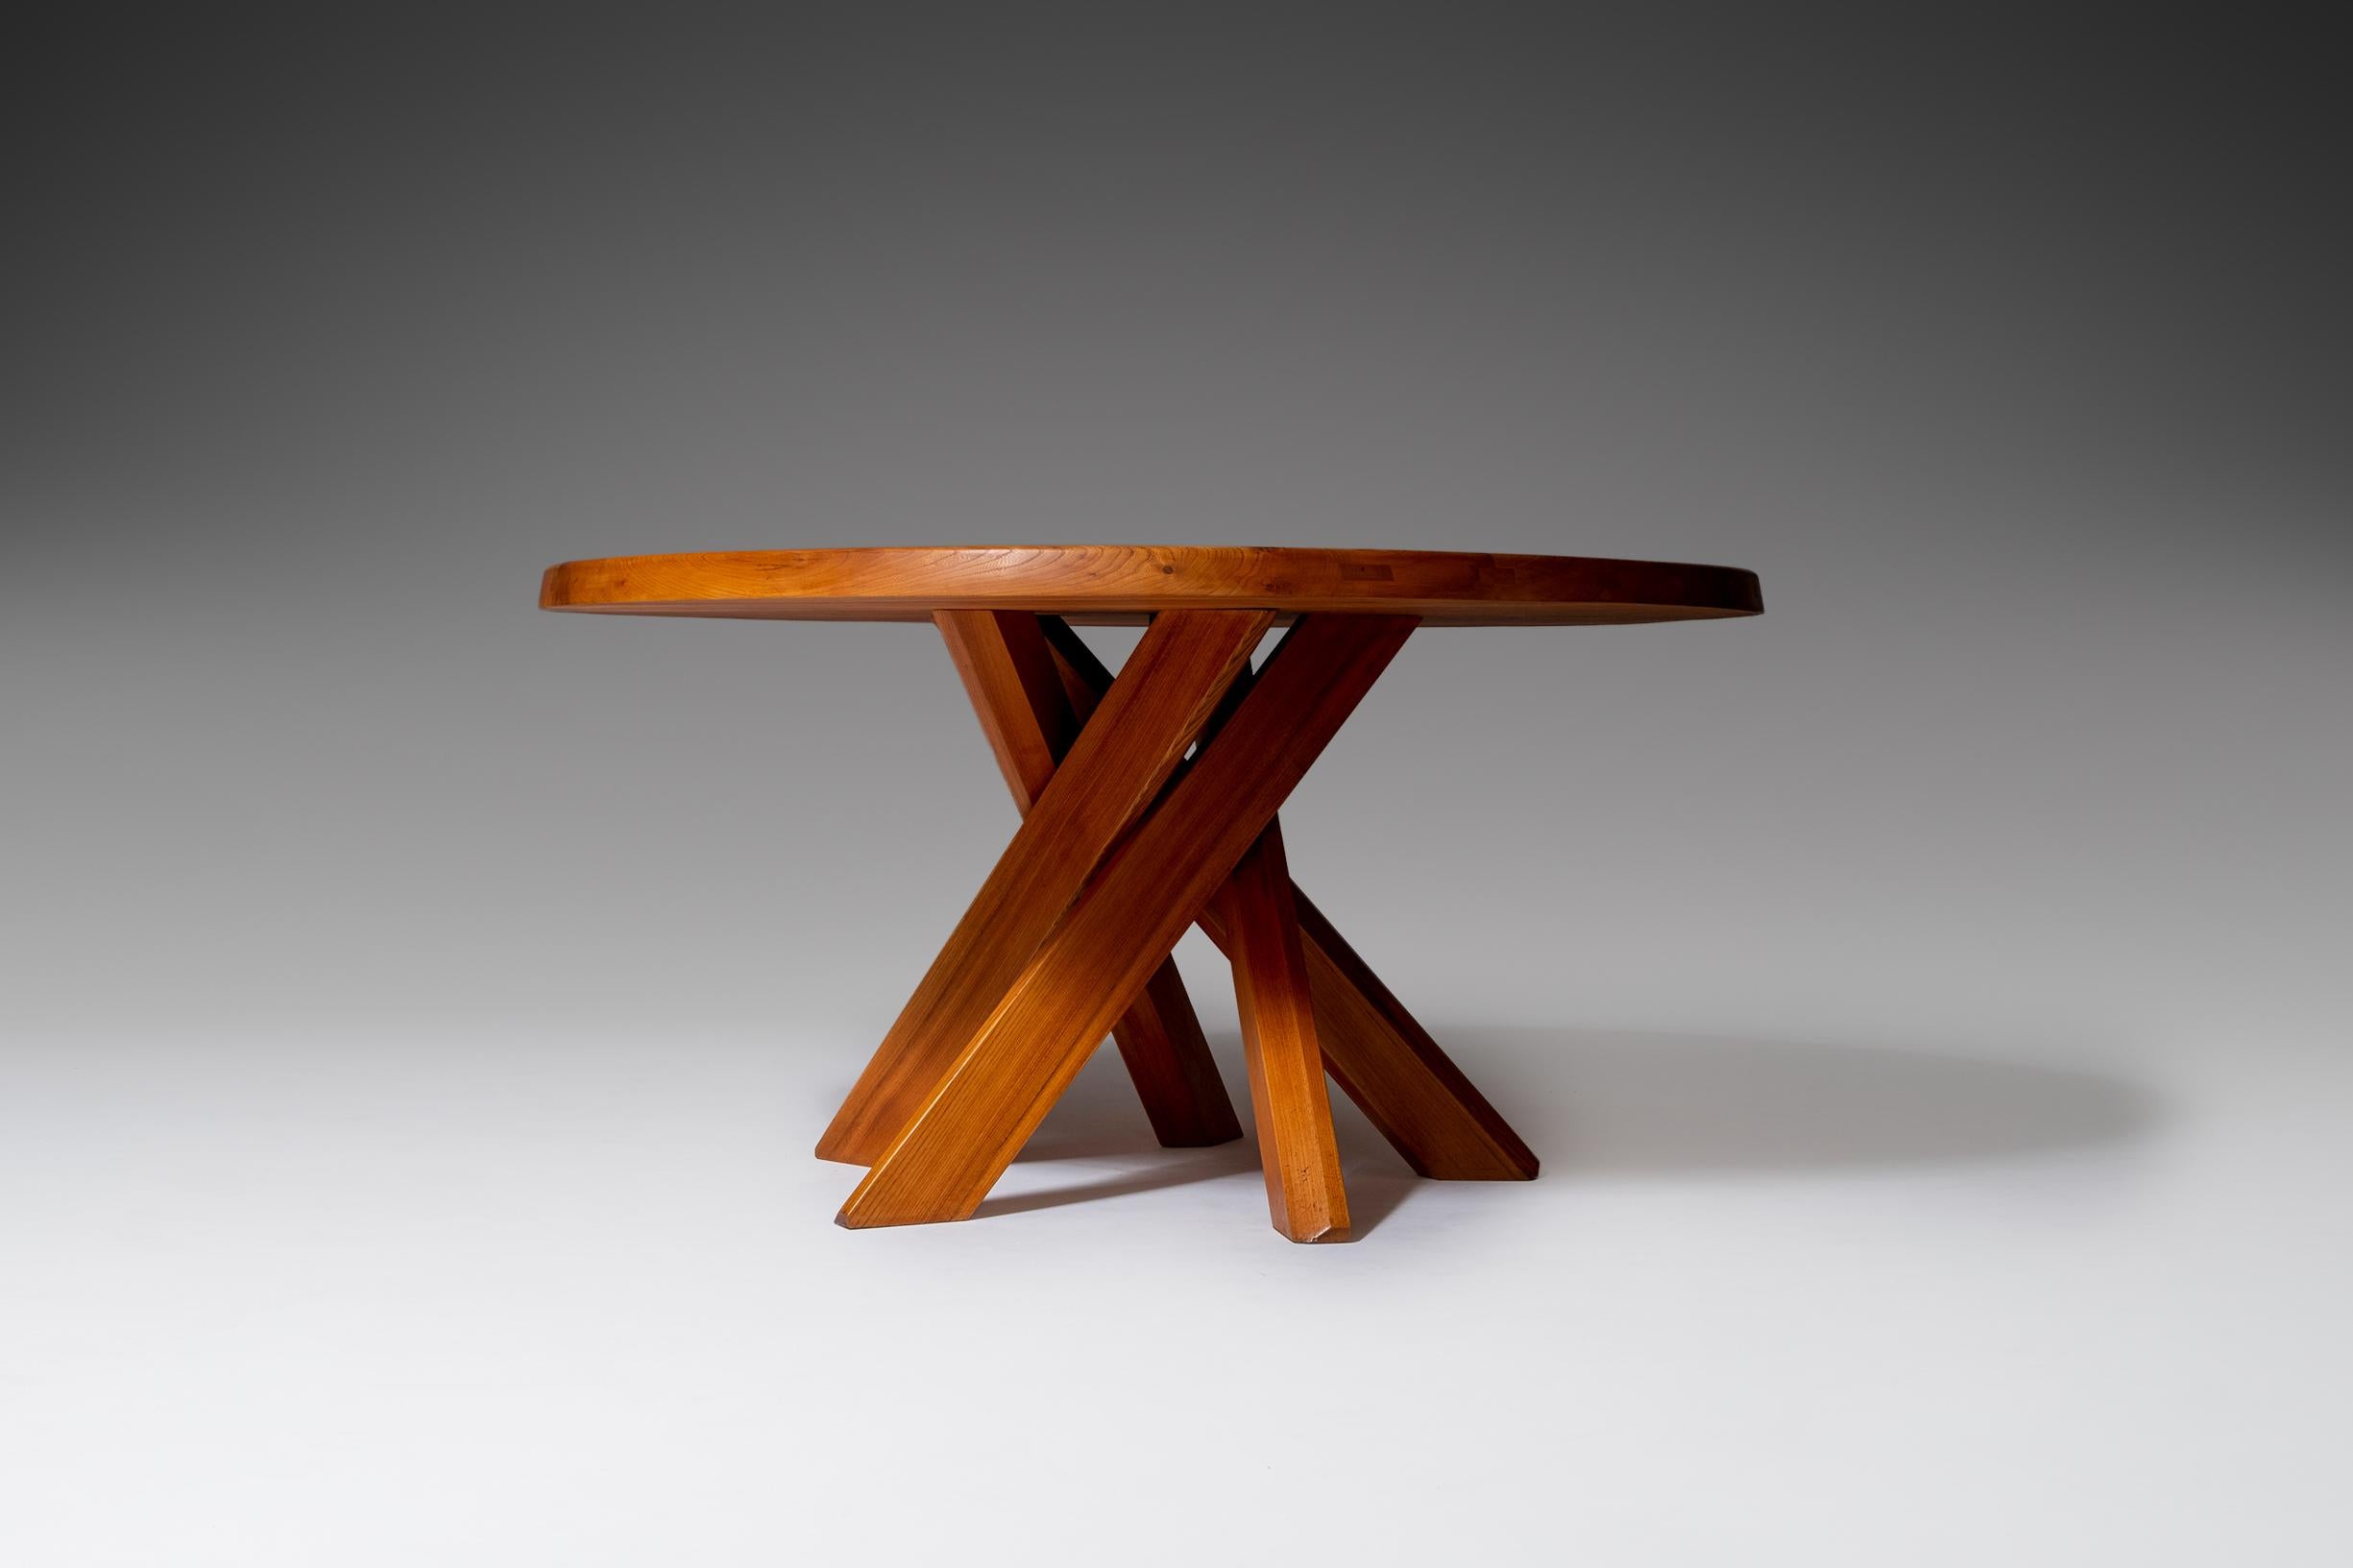 Round ‘T21D' dining table in solid elm by Pierre Chapo, France, 1960s. Remarkable design made of solid warm colored elmwood with a beautiful exposed grain, giving the table a rich, warm and natural appearance. The sculptural base composed of 5